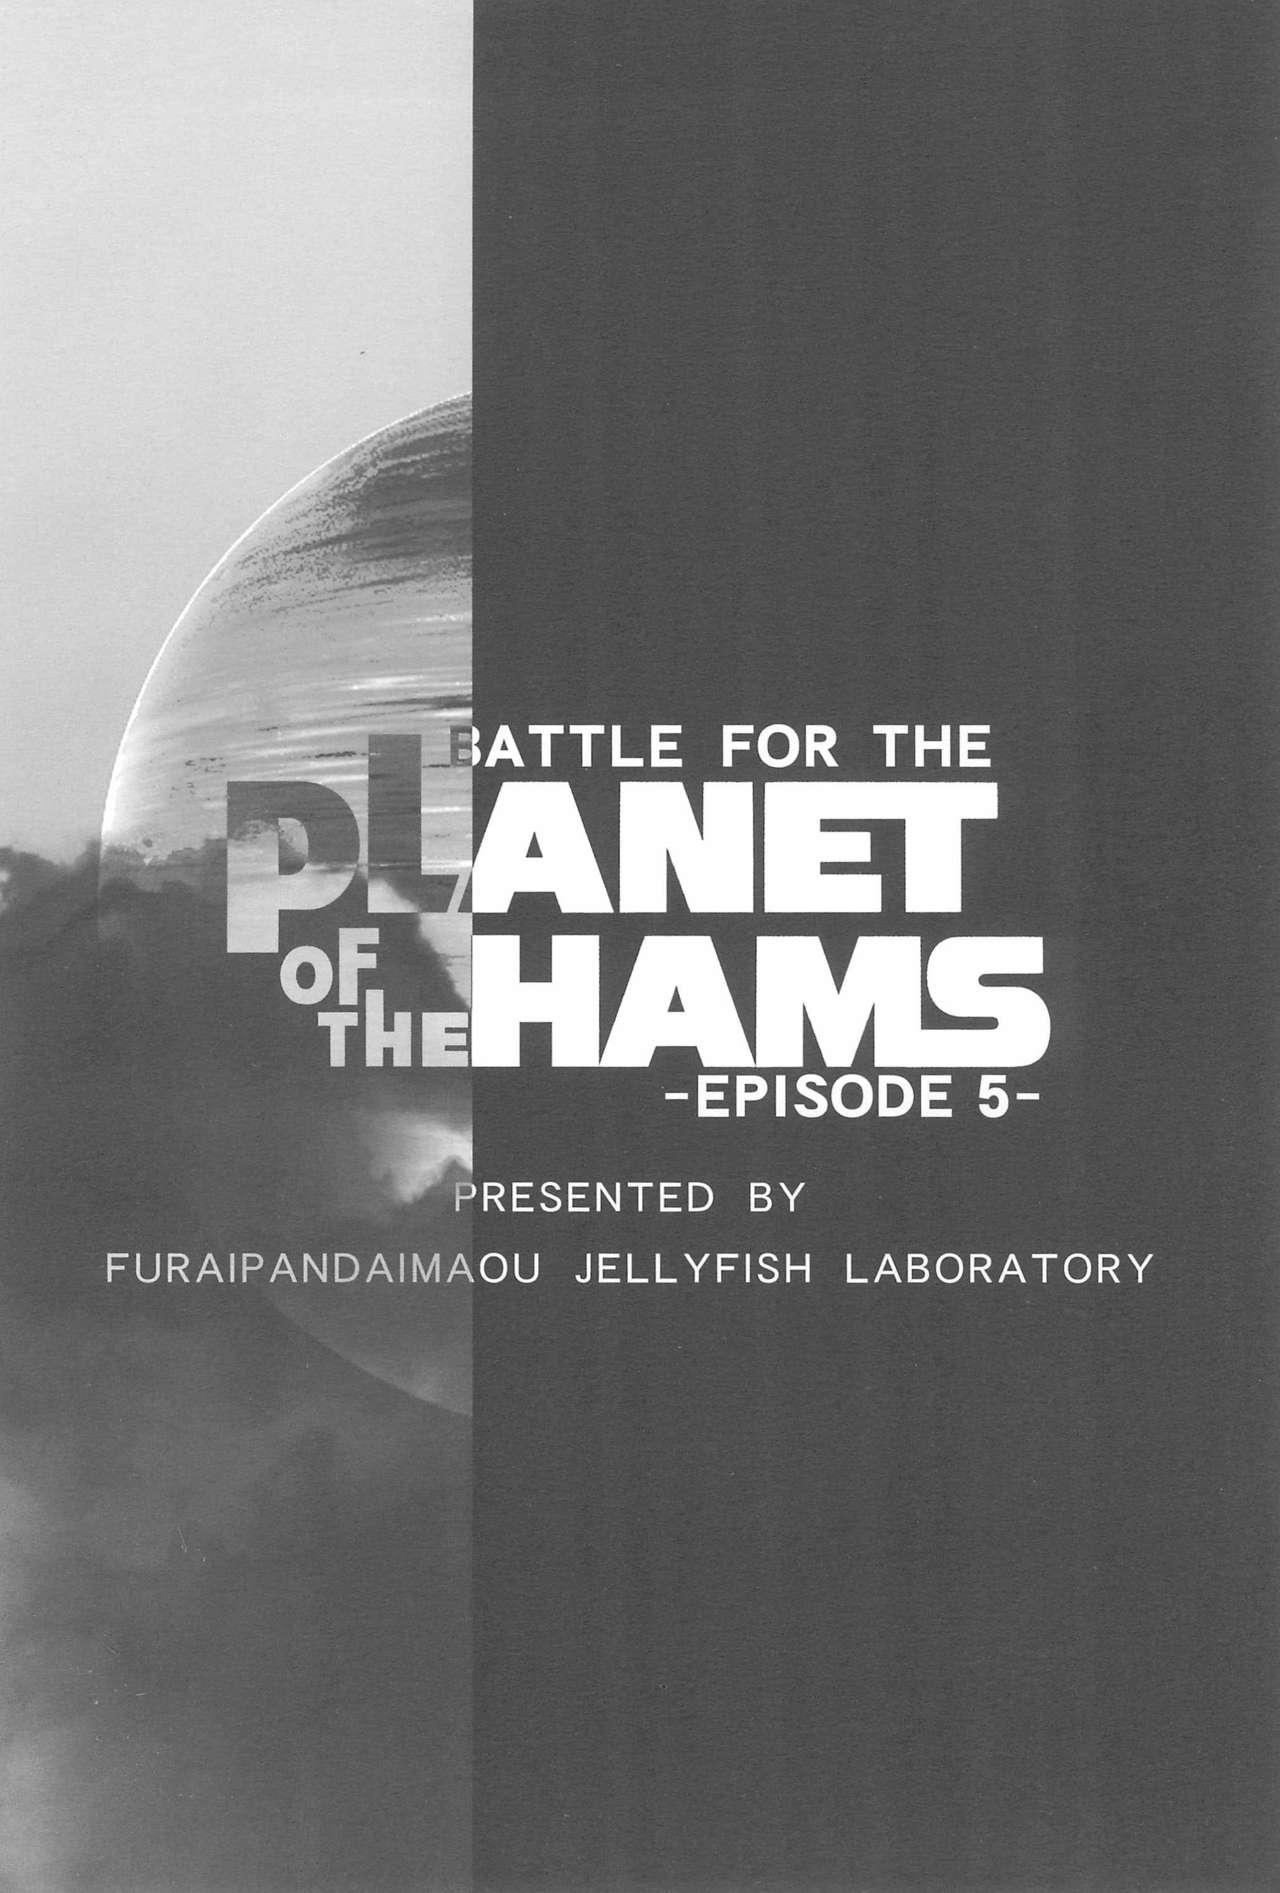 BATTLE FOR THE PLANET OF THE HAMS 19